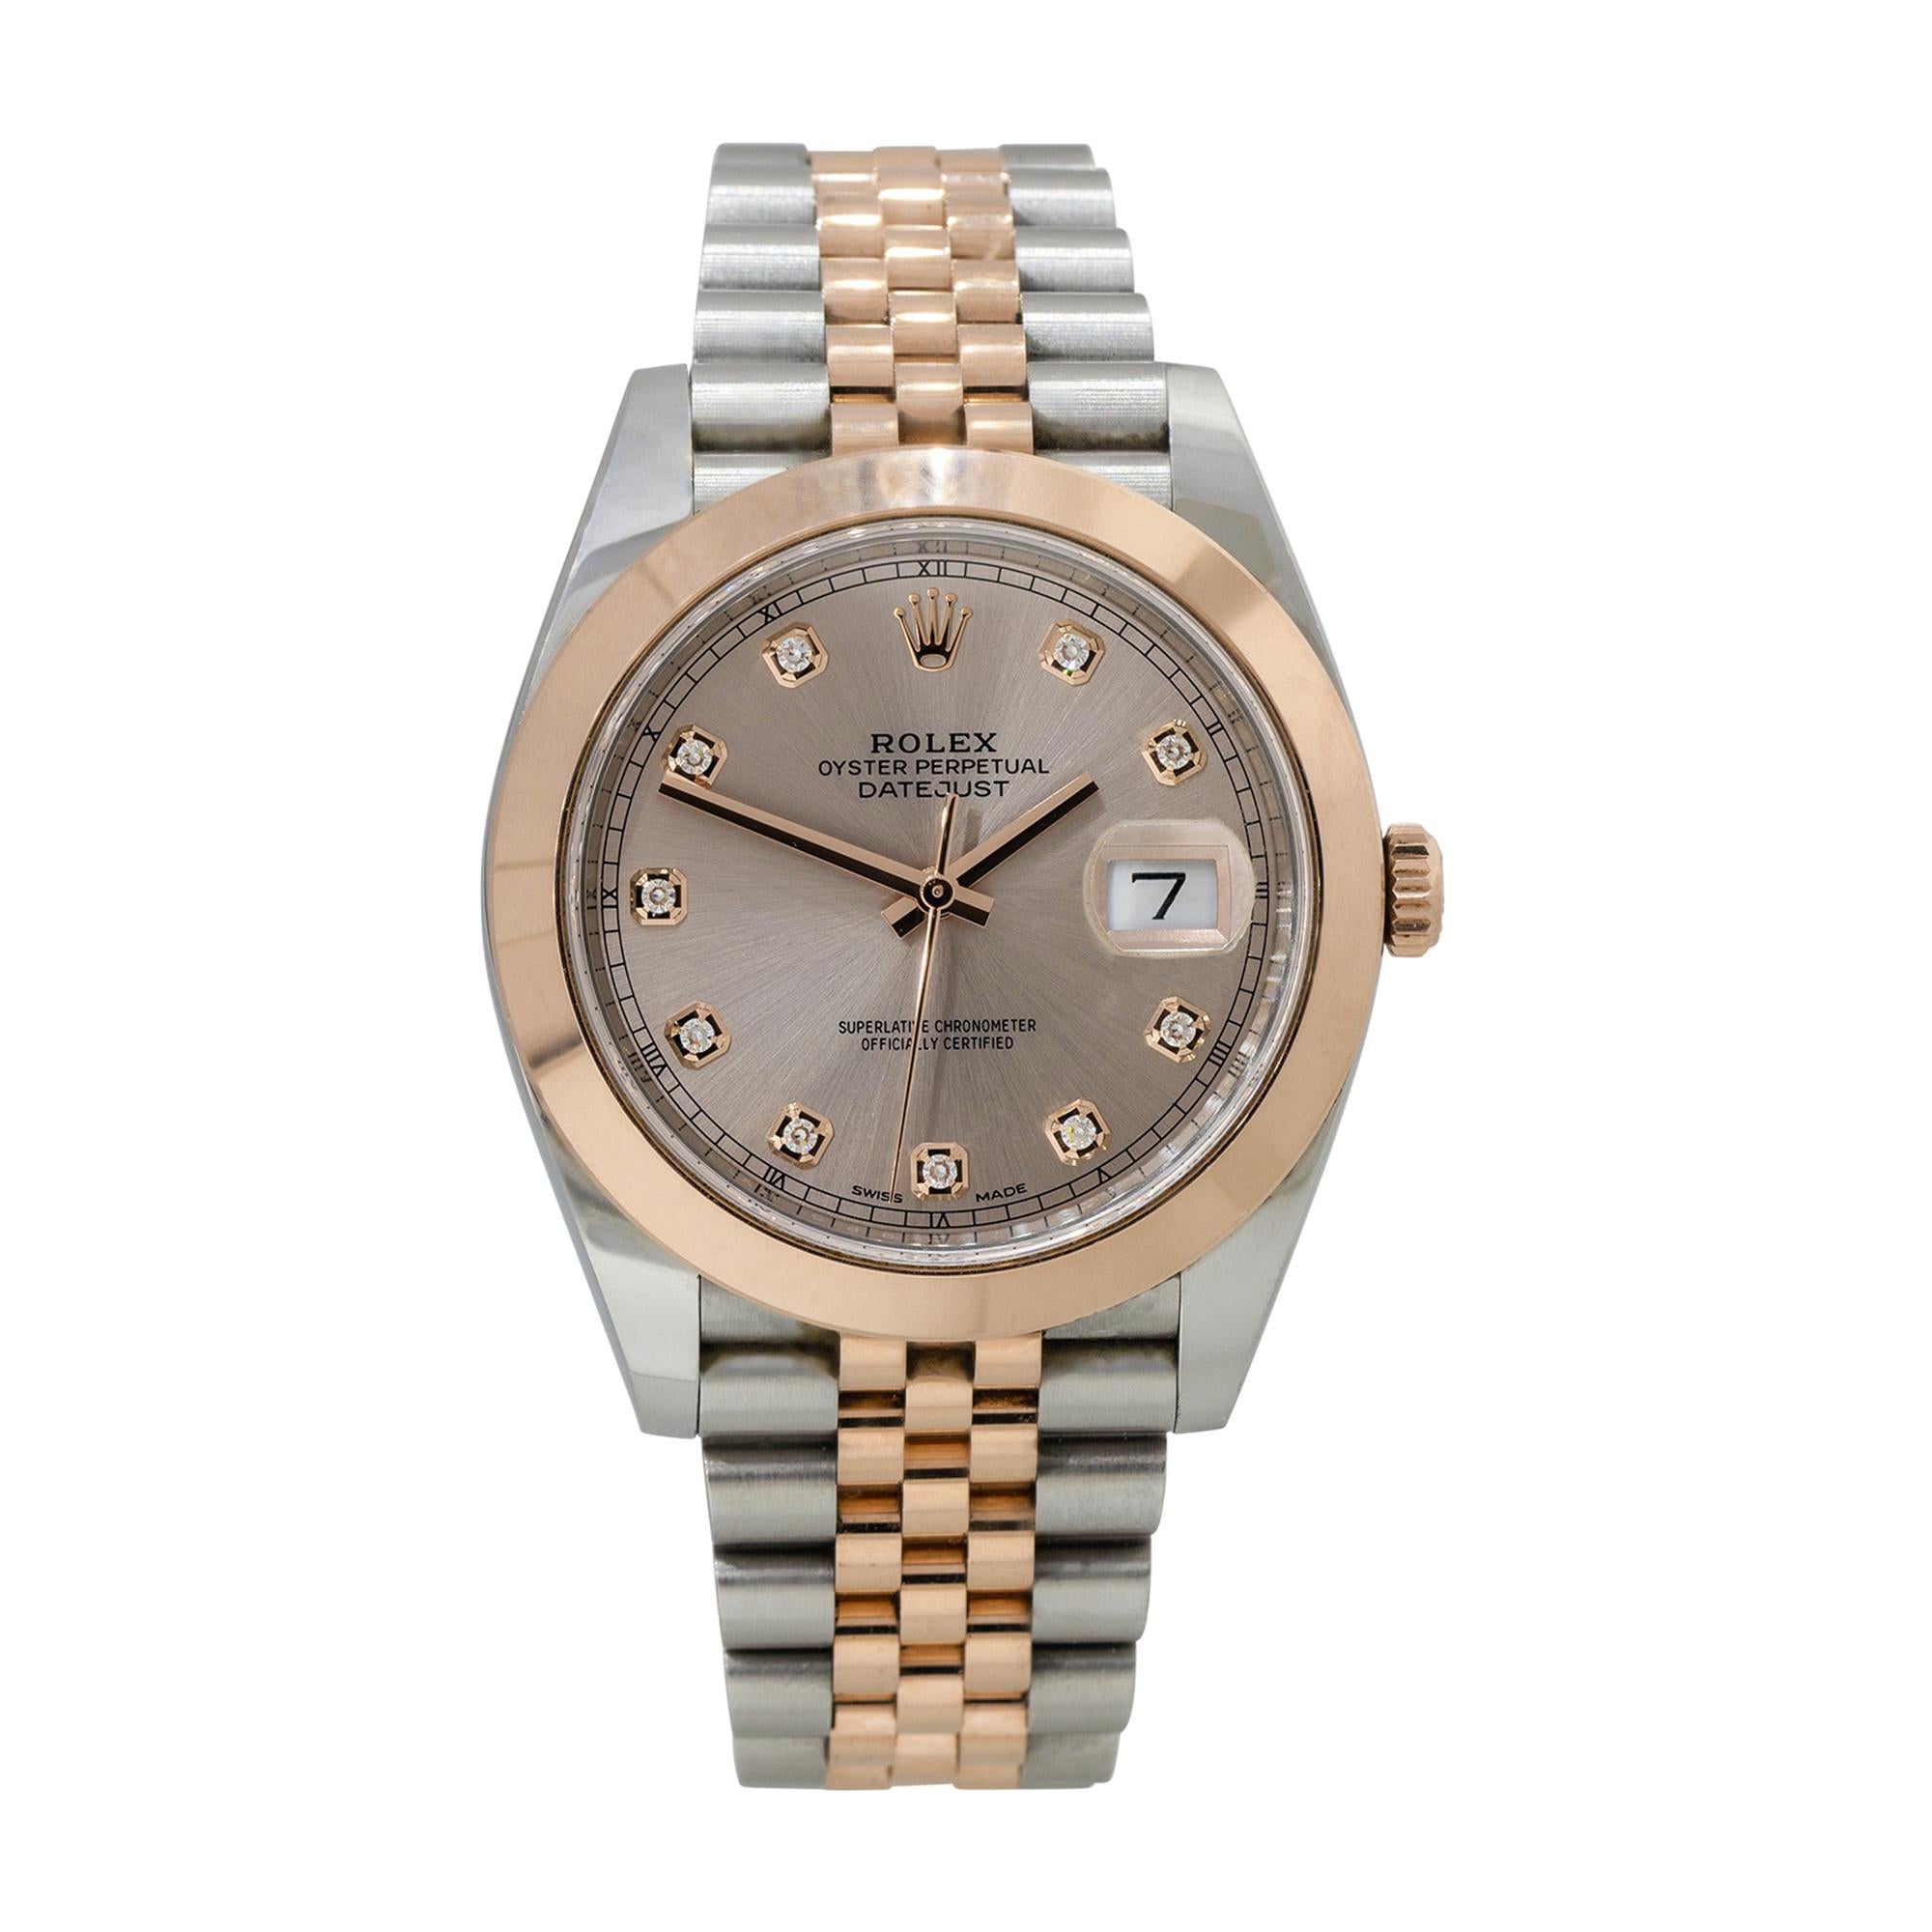 Brand: Rolex
MPN: 126301
Model: Datejust II
Case Material: Stainless steel
Case Diameter: 41mm
Crystal: Scratch resistant sapphire
Bezel: 18k rose gold smooth bezel
Dial: Rose tone dial with diamond dial markers, rose gold hands and date window at